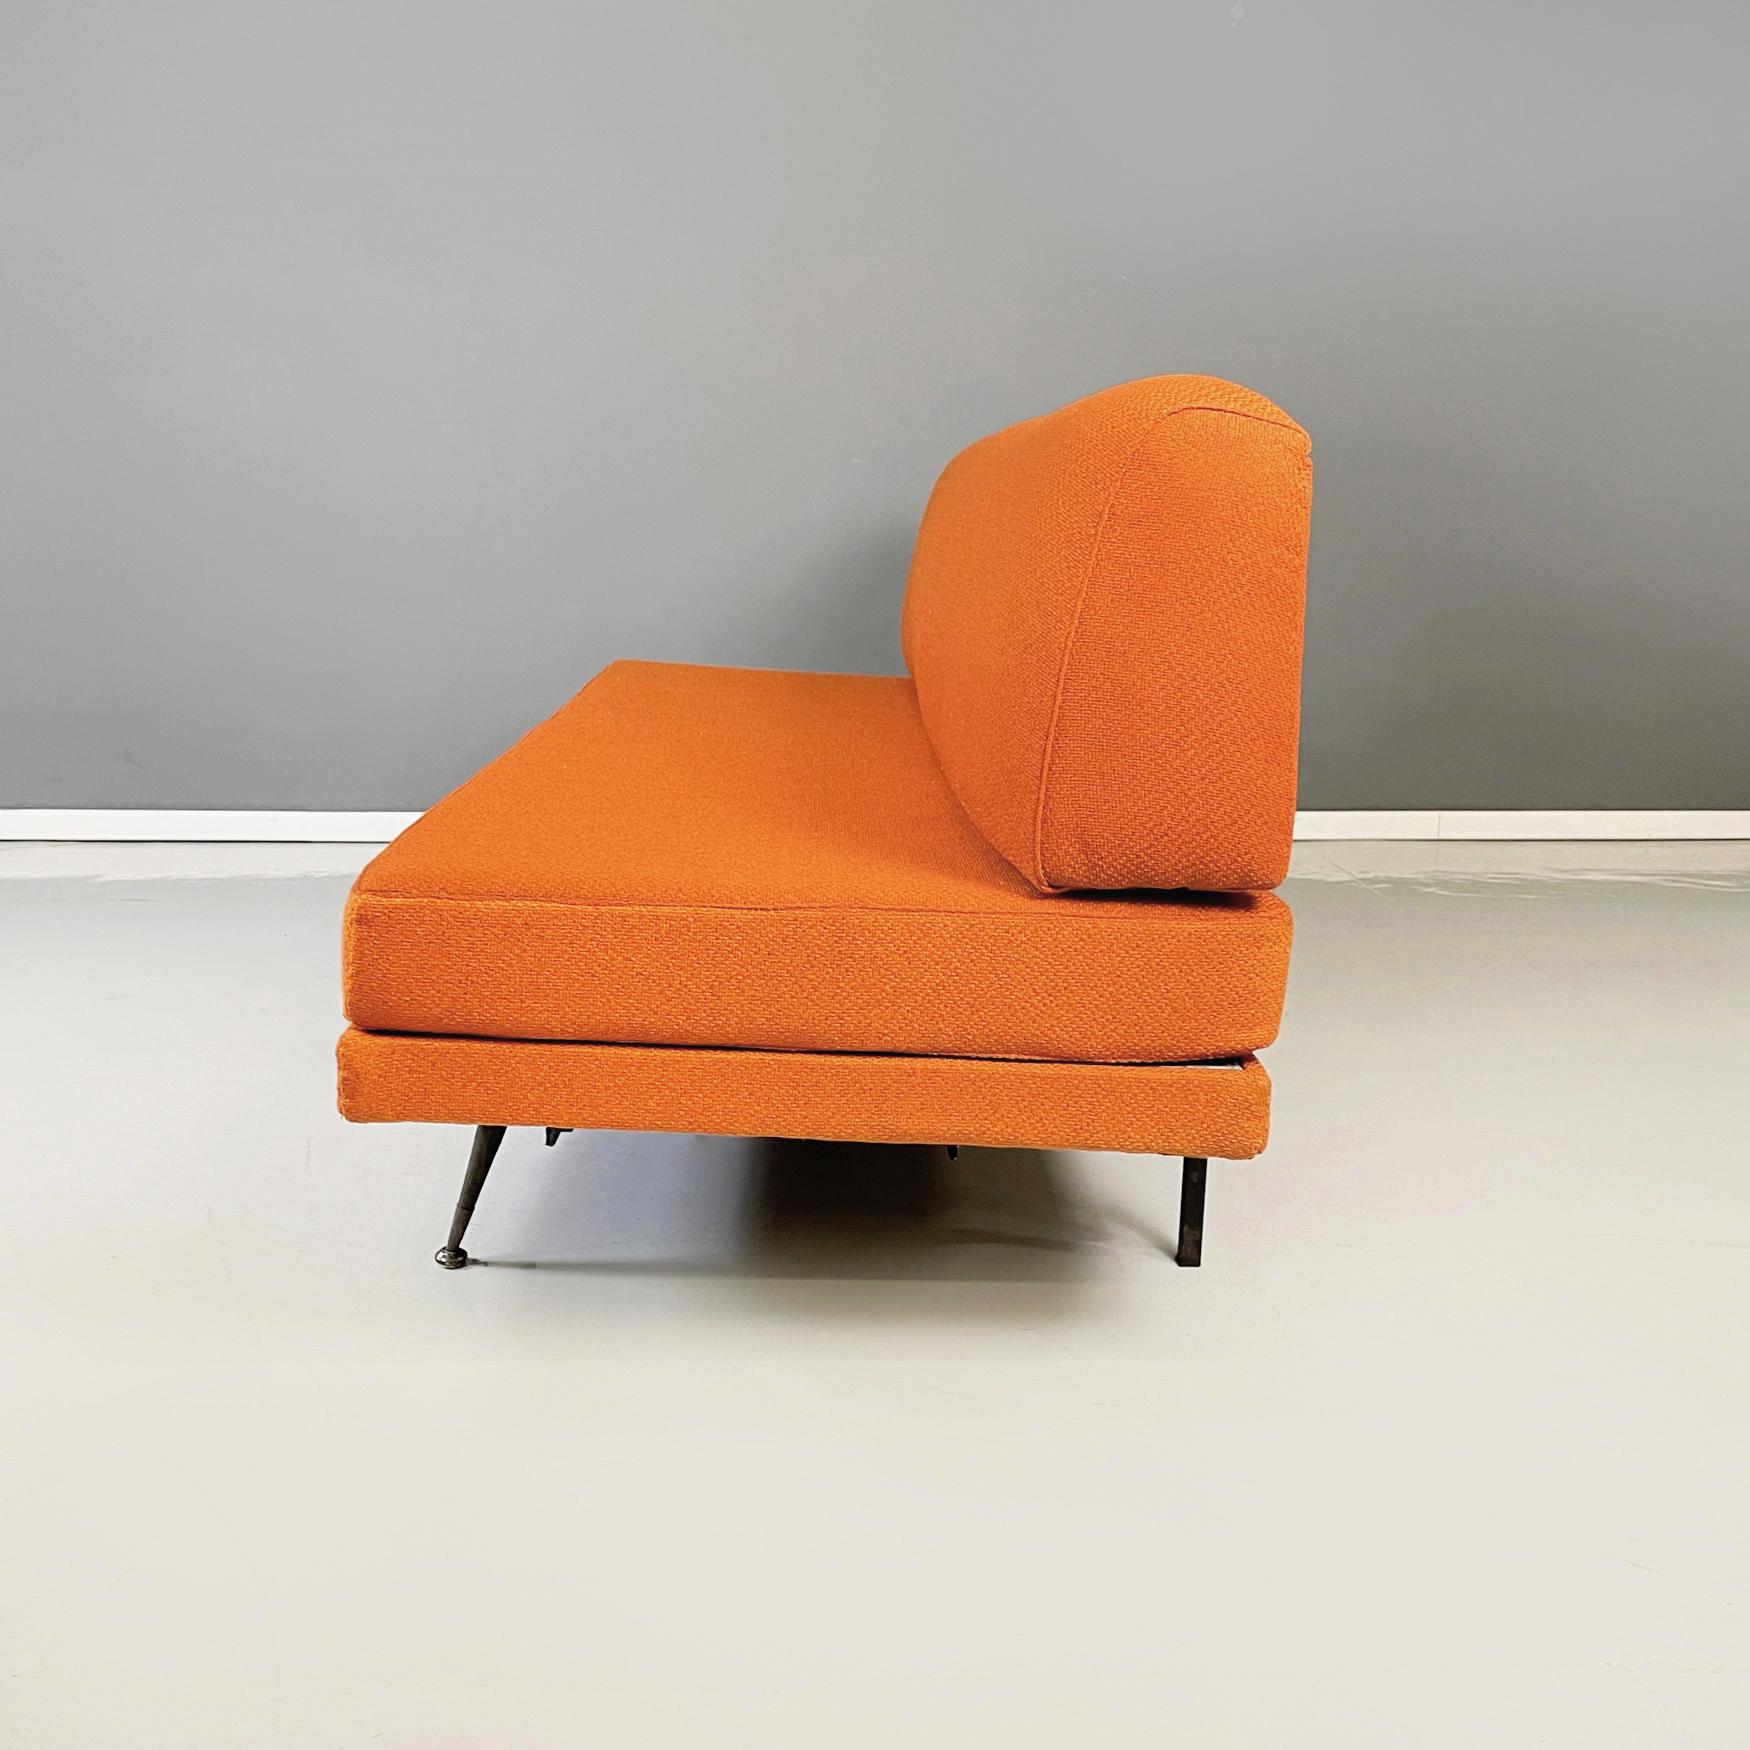 Italian Mid-Century Modern Sofa and Bed in orange Fabric and Black Metal, 1960s 2